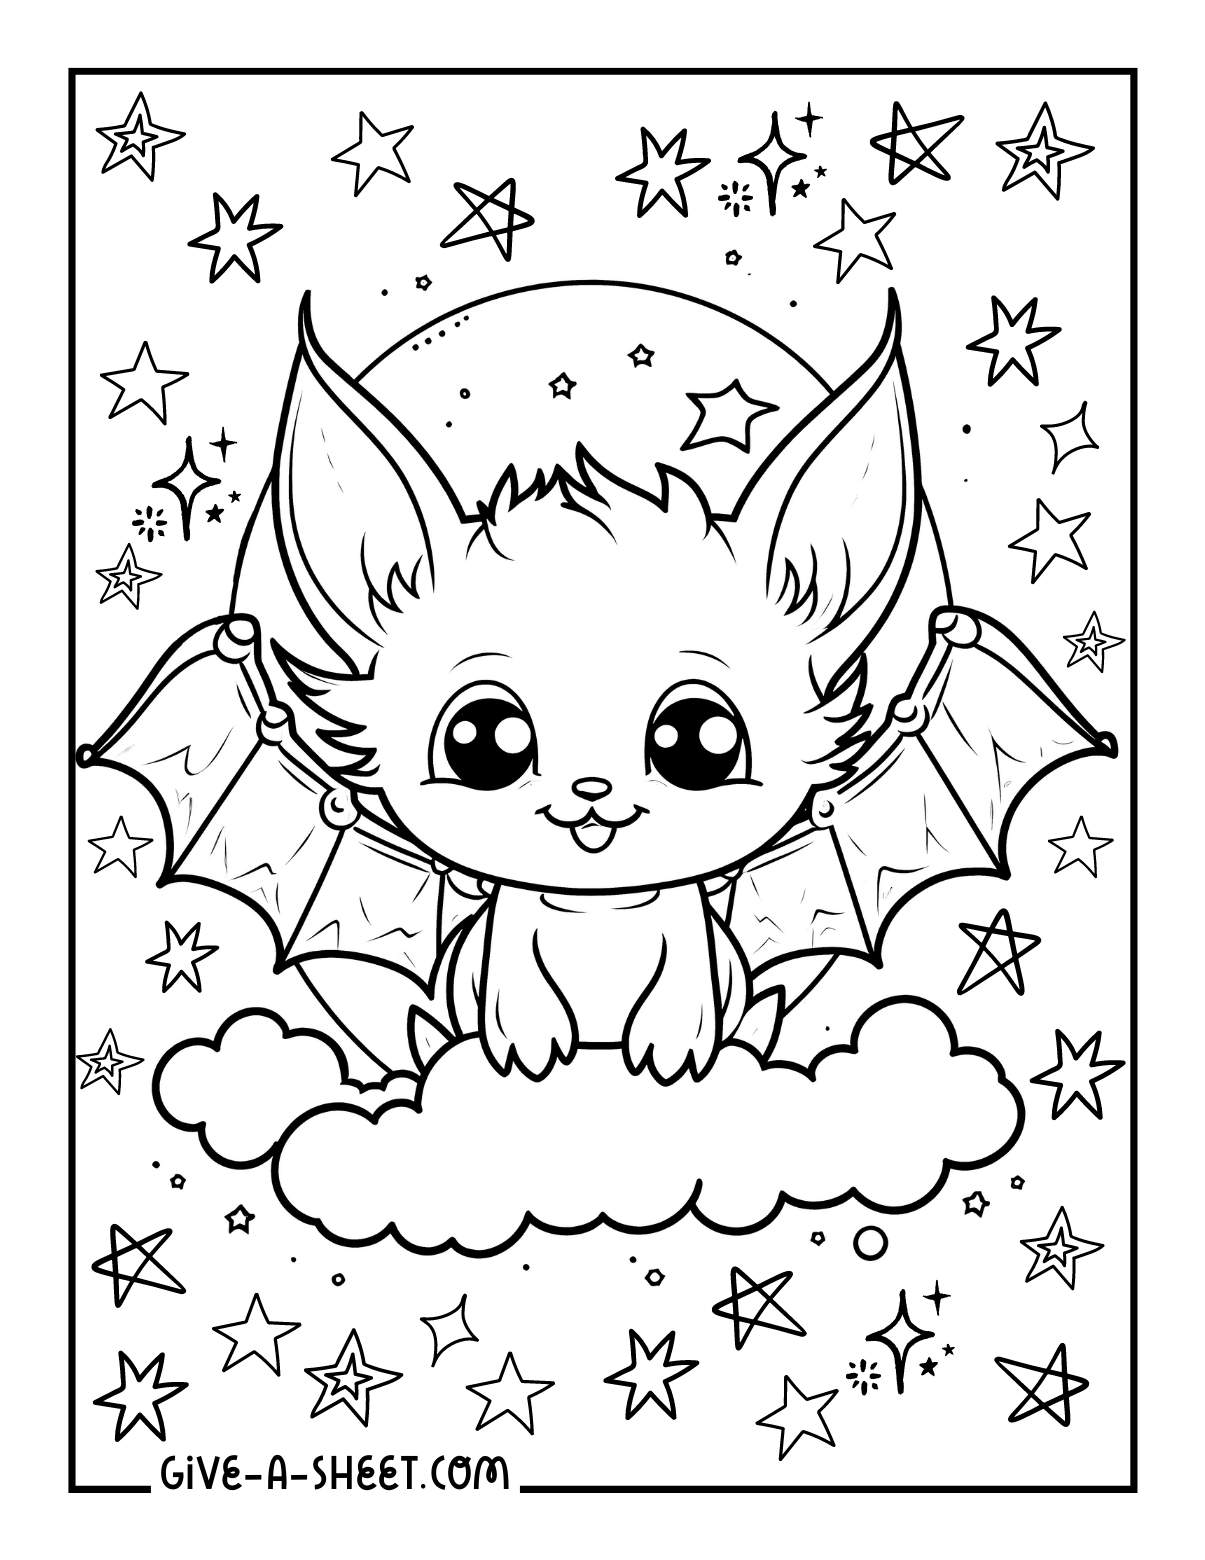 Friendly bats on full moon to color for children of all ages.